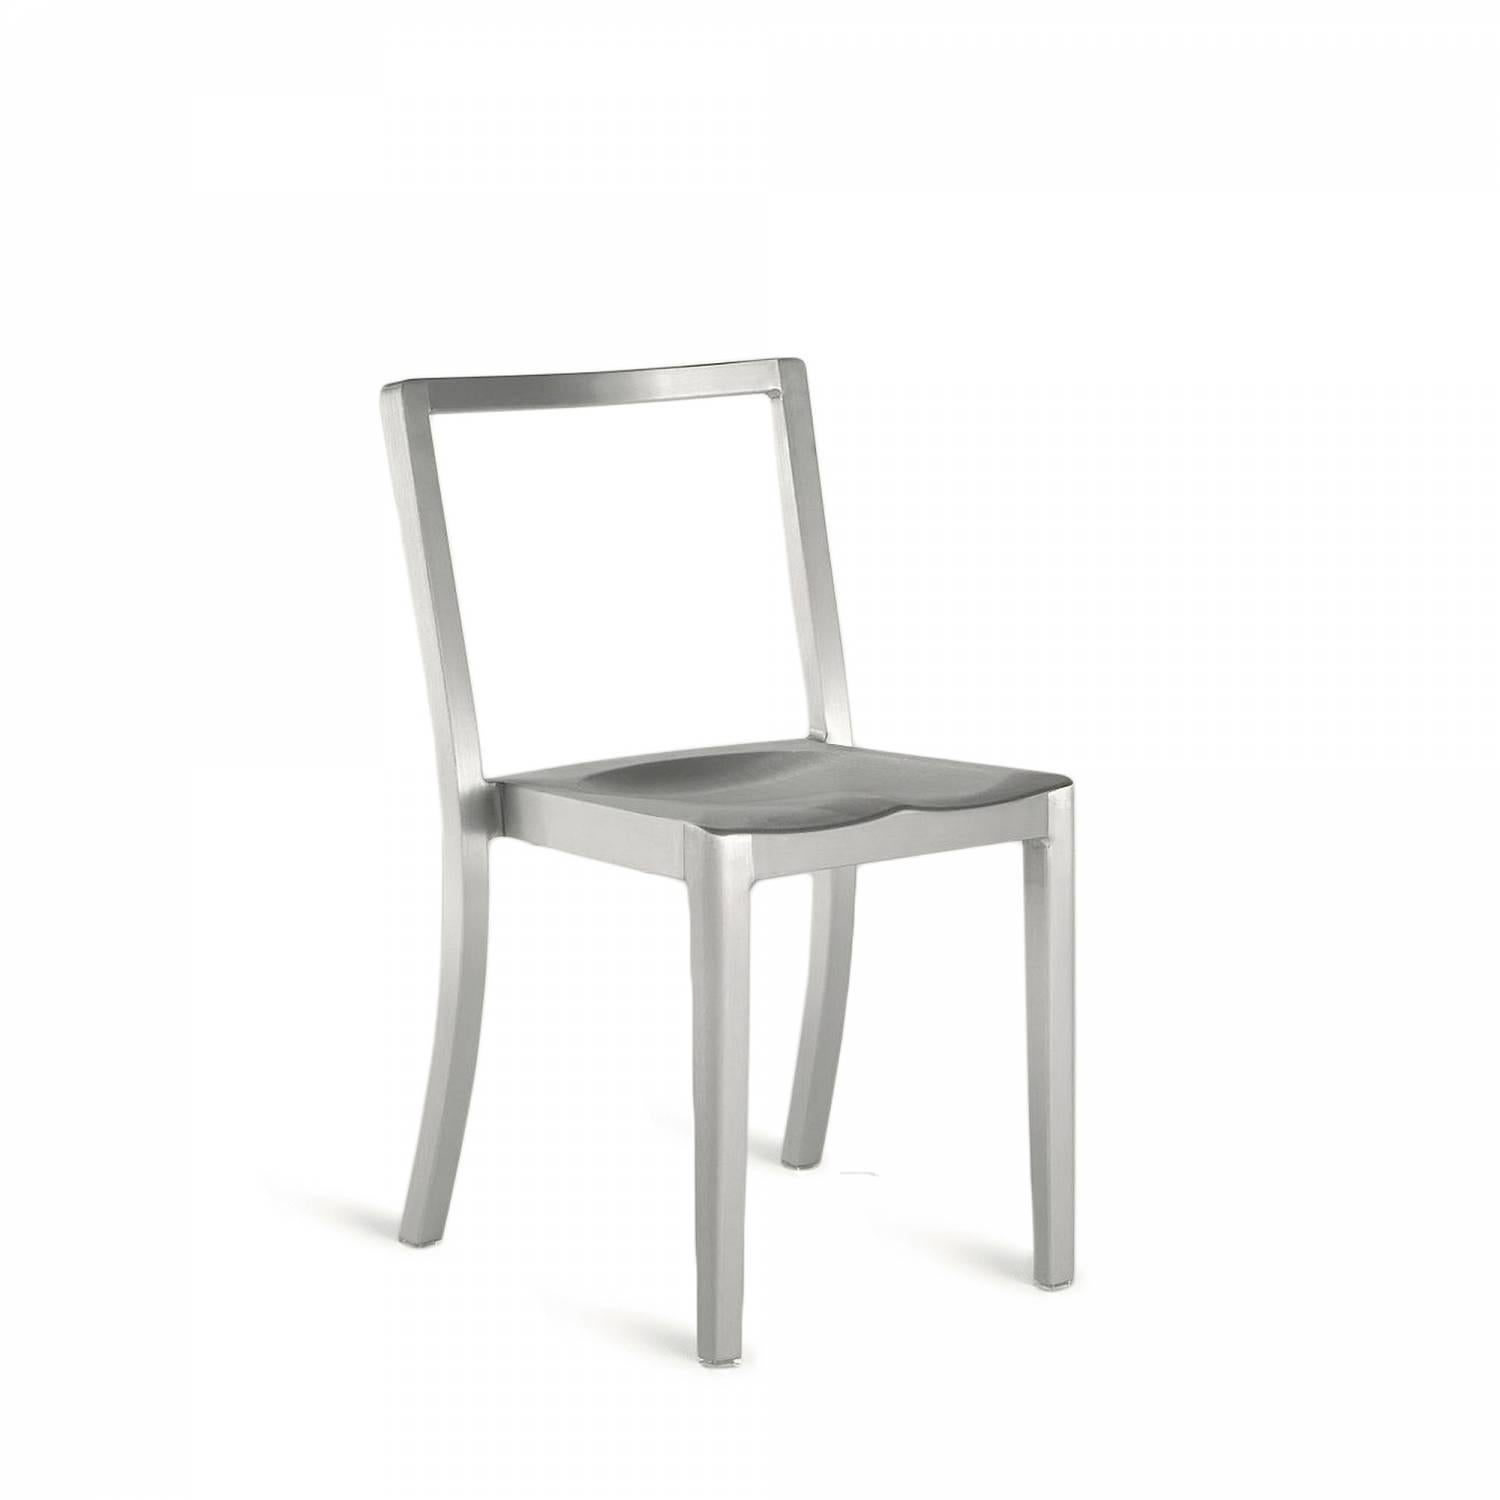 Icon is a stacking chair cousin to the famous Starck designed Hudson chair. It has been used in hotels, bars and restaurants worldwide, as well as training centres, meeting areas and schools. Starck describes Icon as “the chair I see when I close my